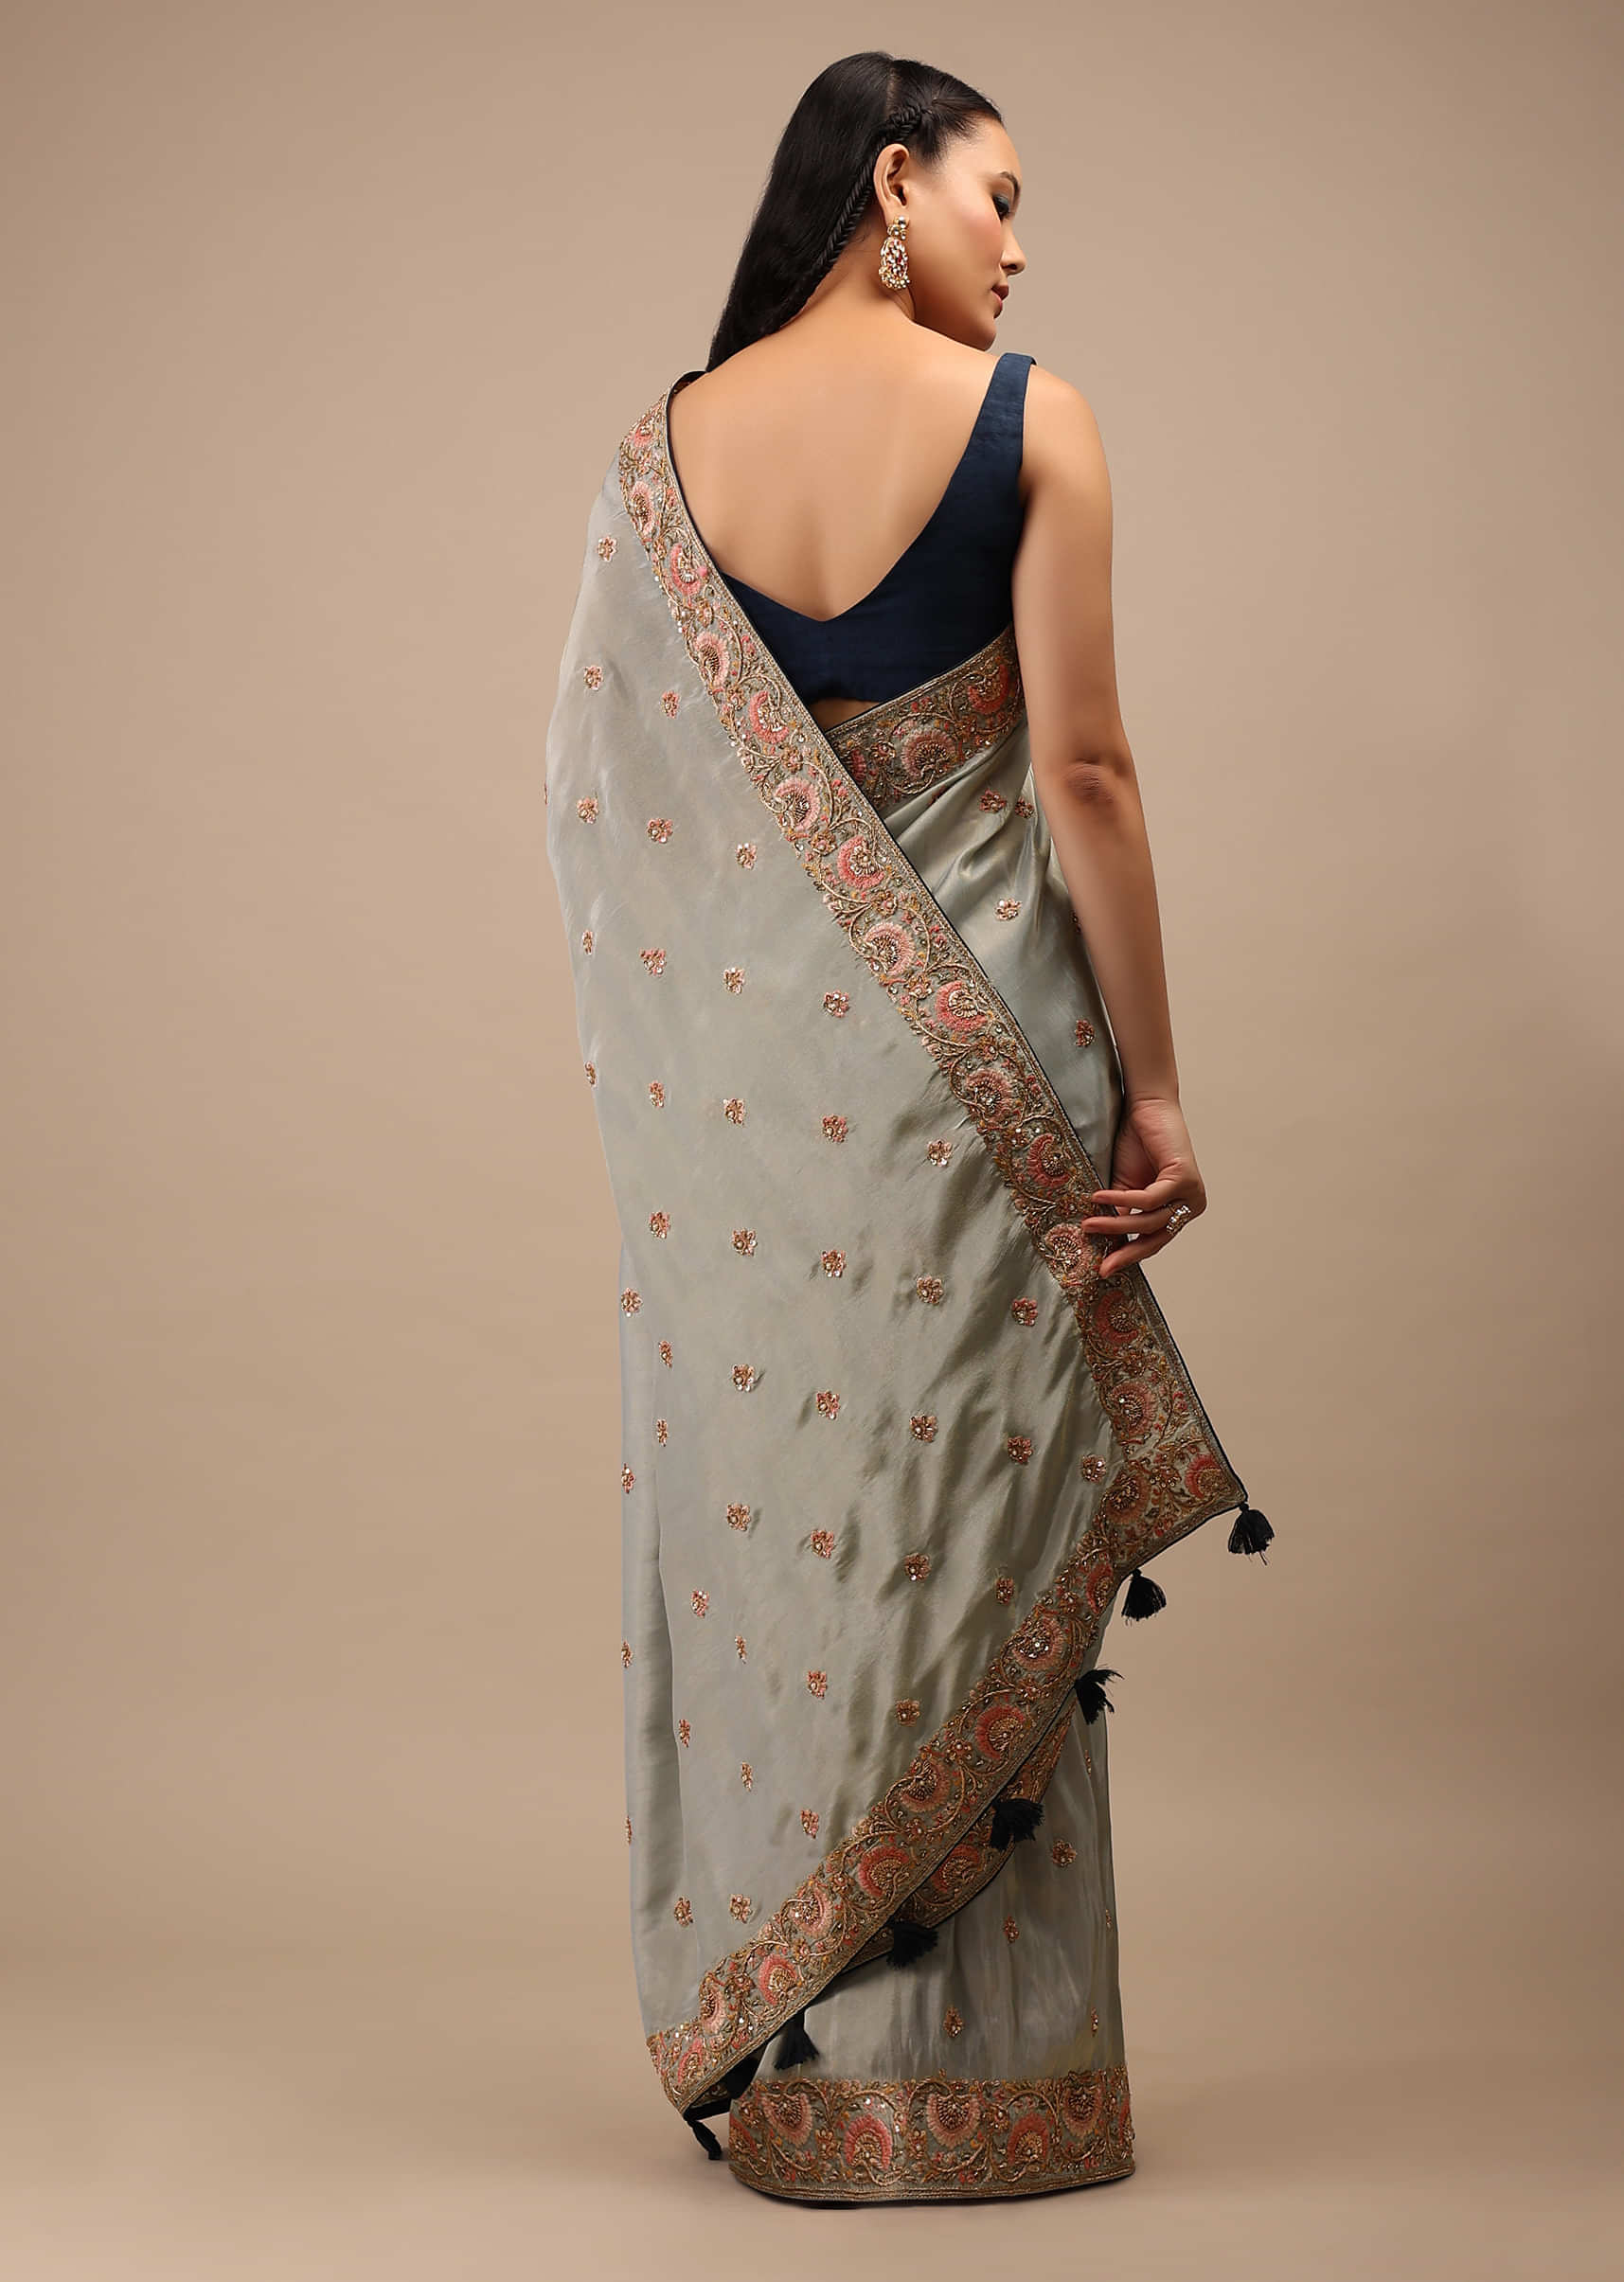 Sky Grey Tissue Saree In Resham Work And Moti Embroidery Floral Buttis, Floral Motifs Embroidery On The Border 